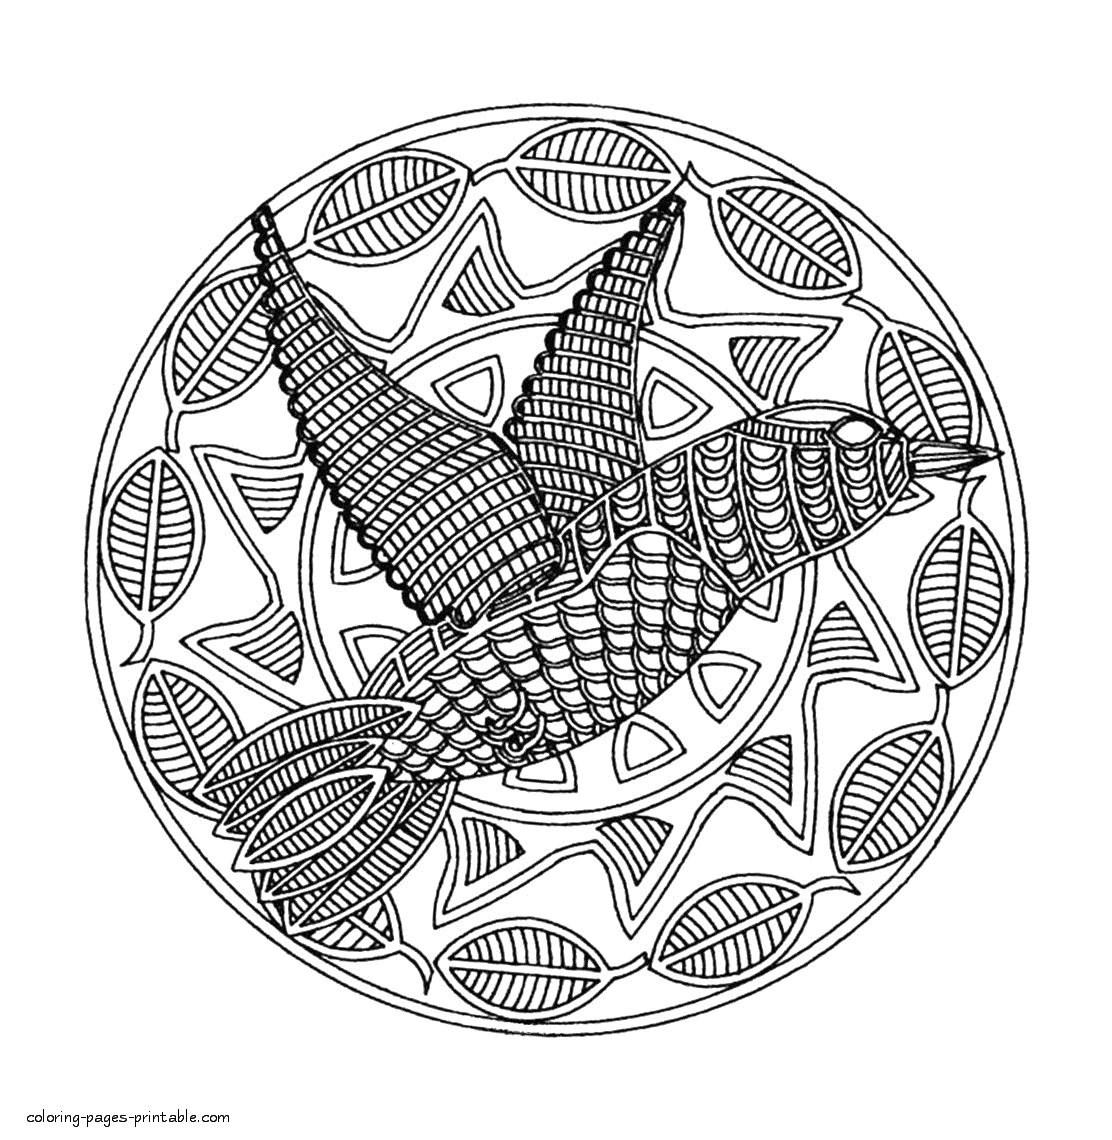 Bird Mandala Coloring Page For Adults